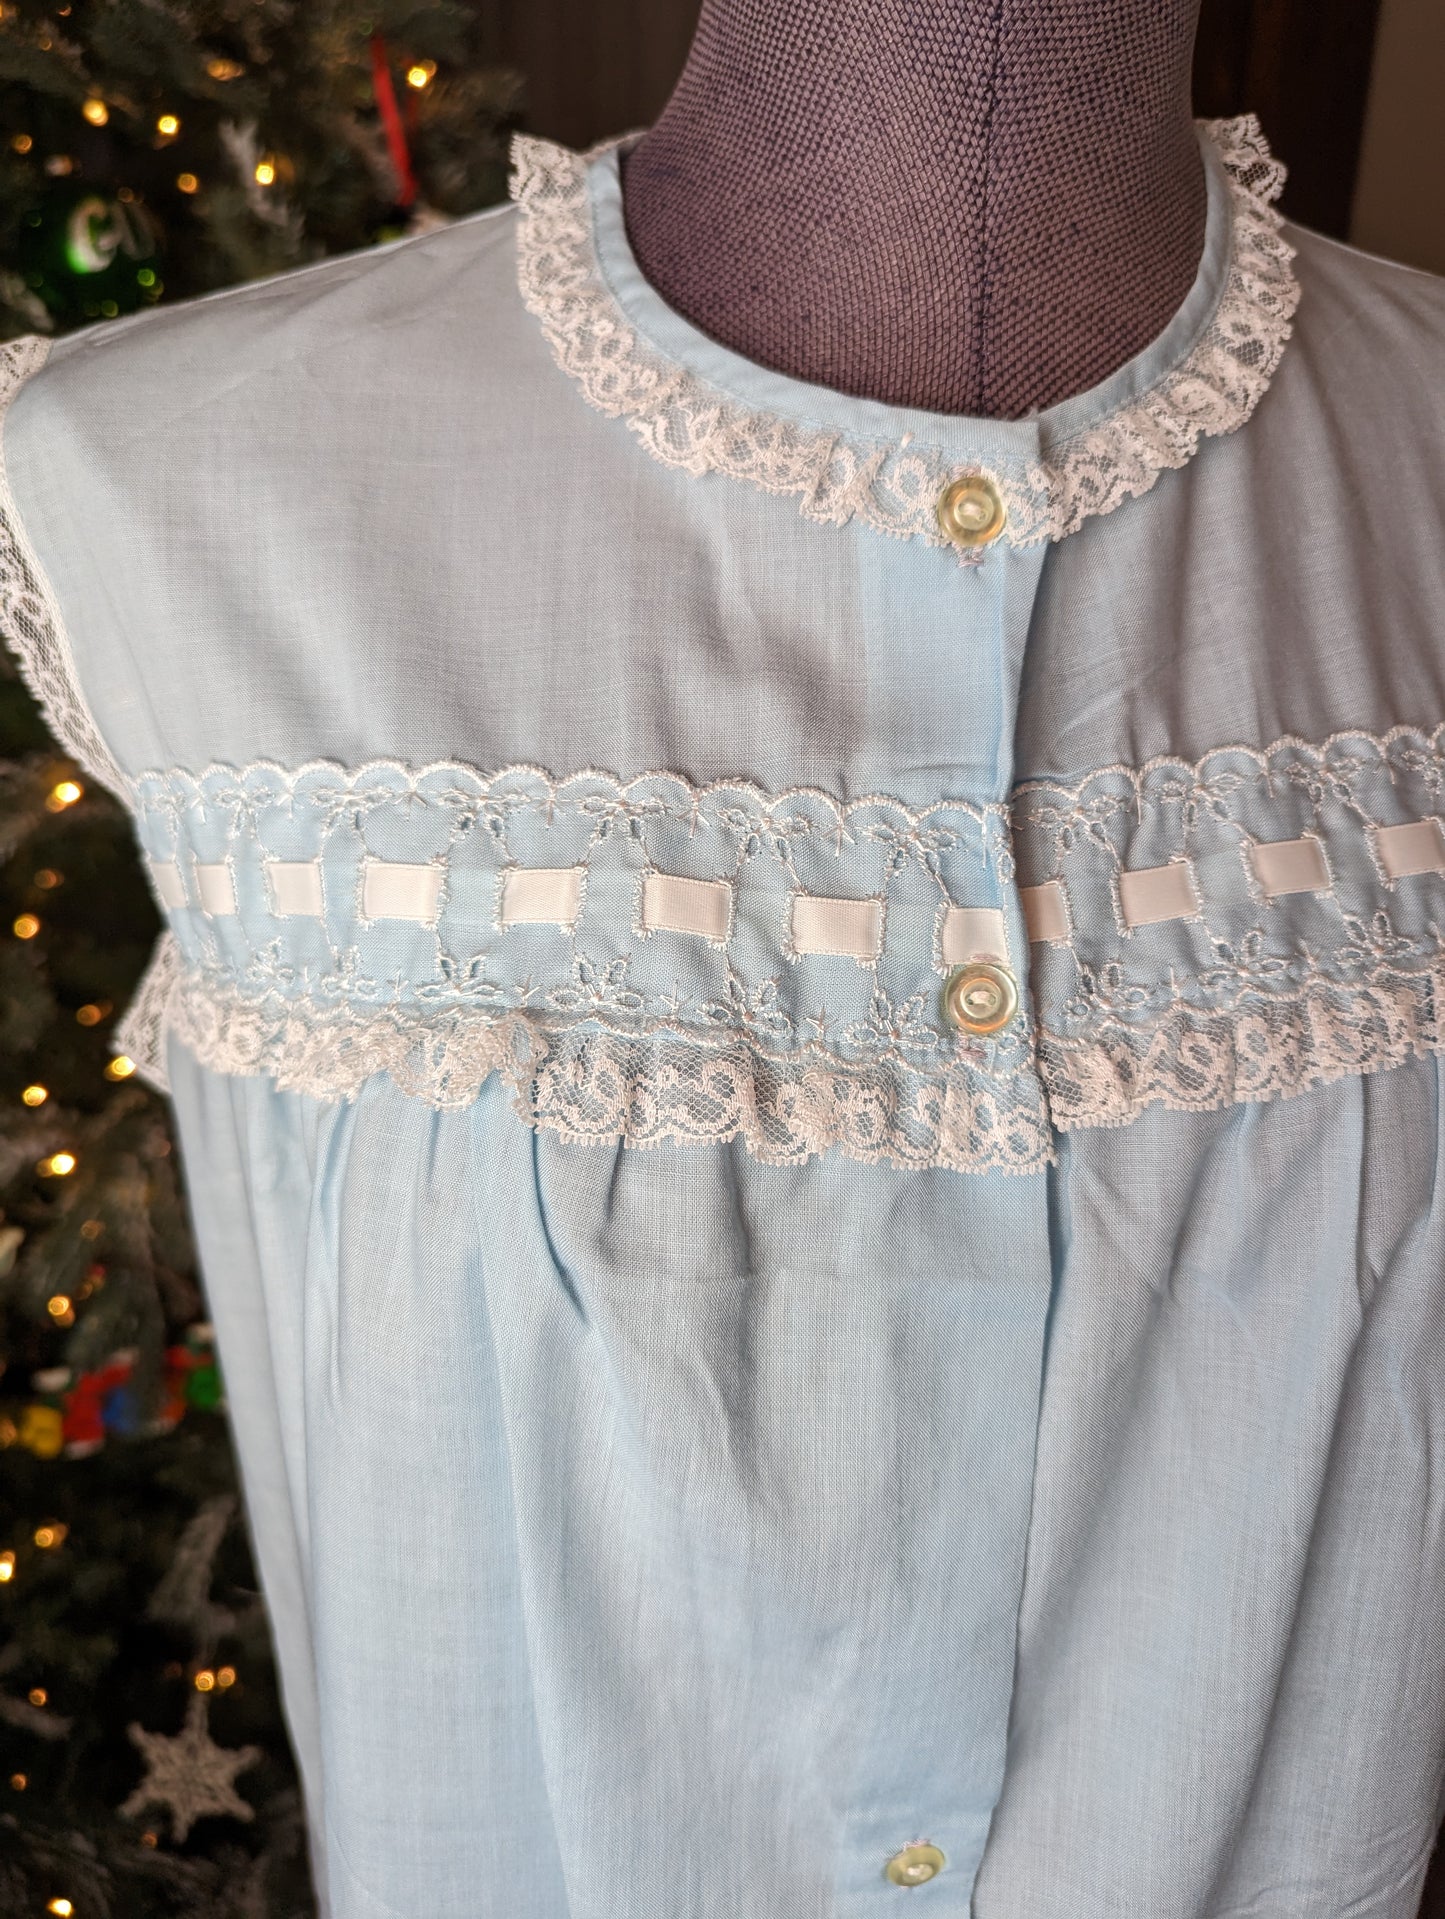 1960s Baby Blue Cotton Nightgown